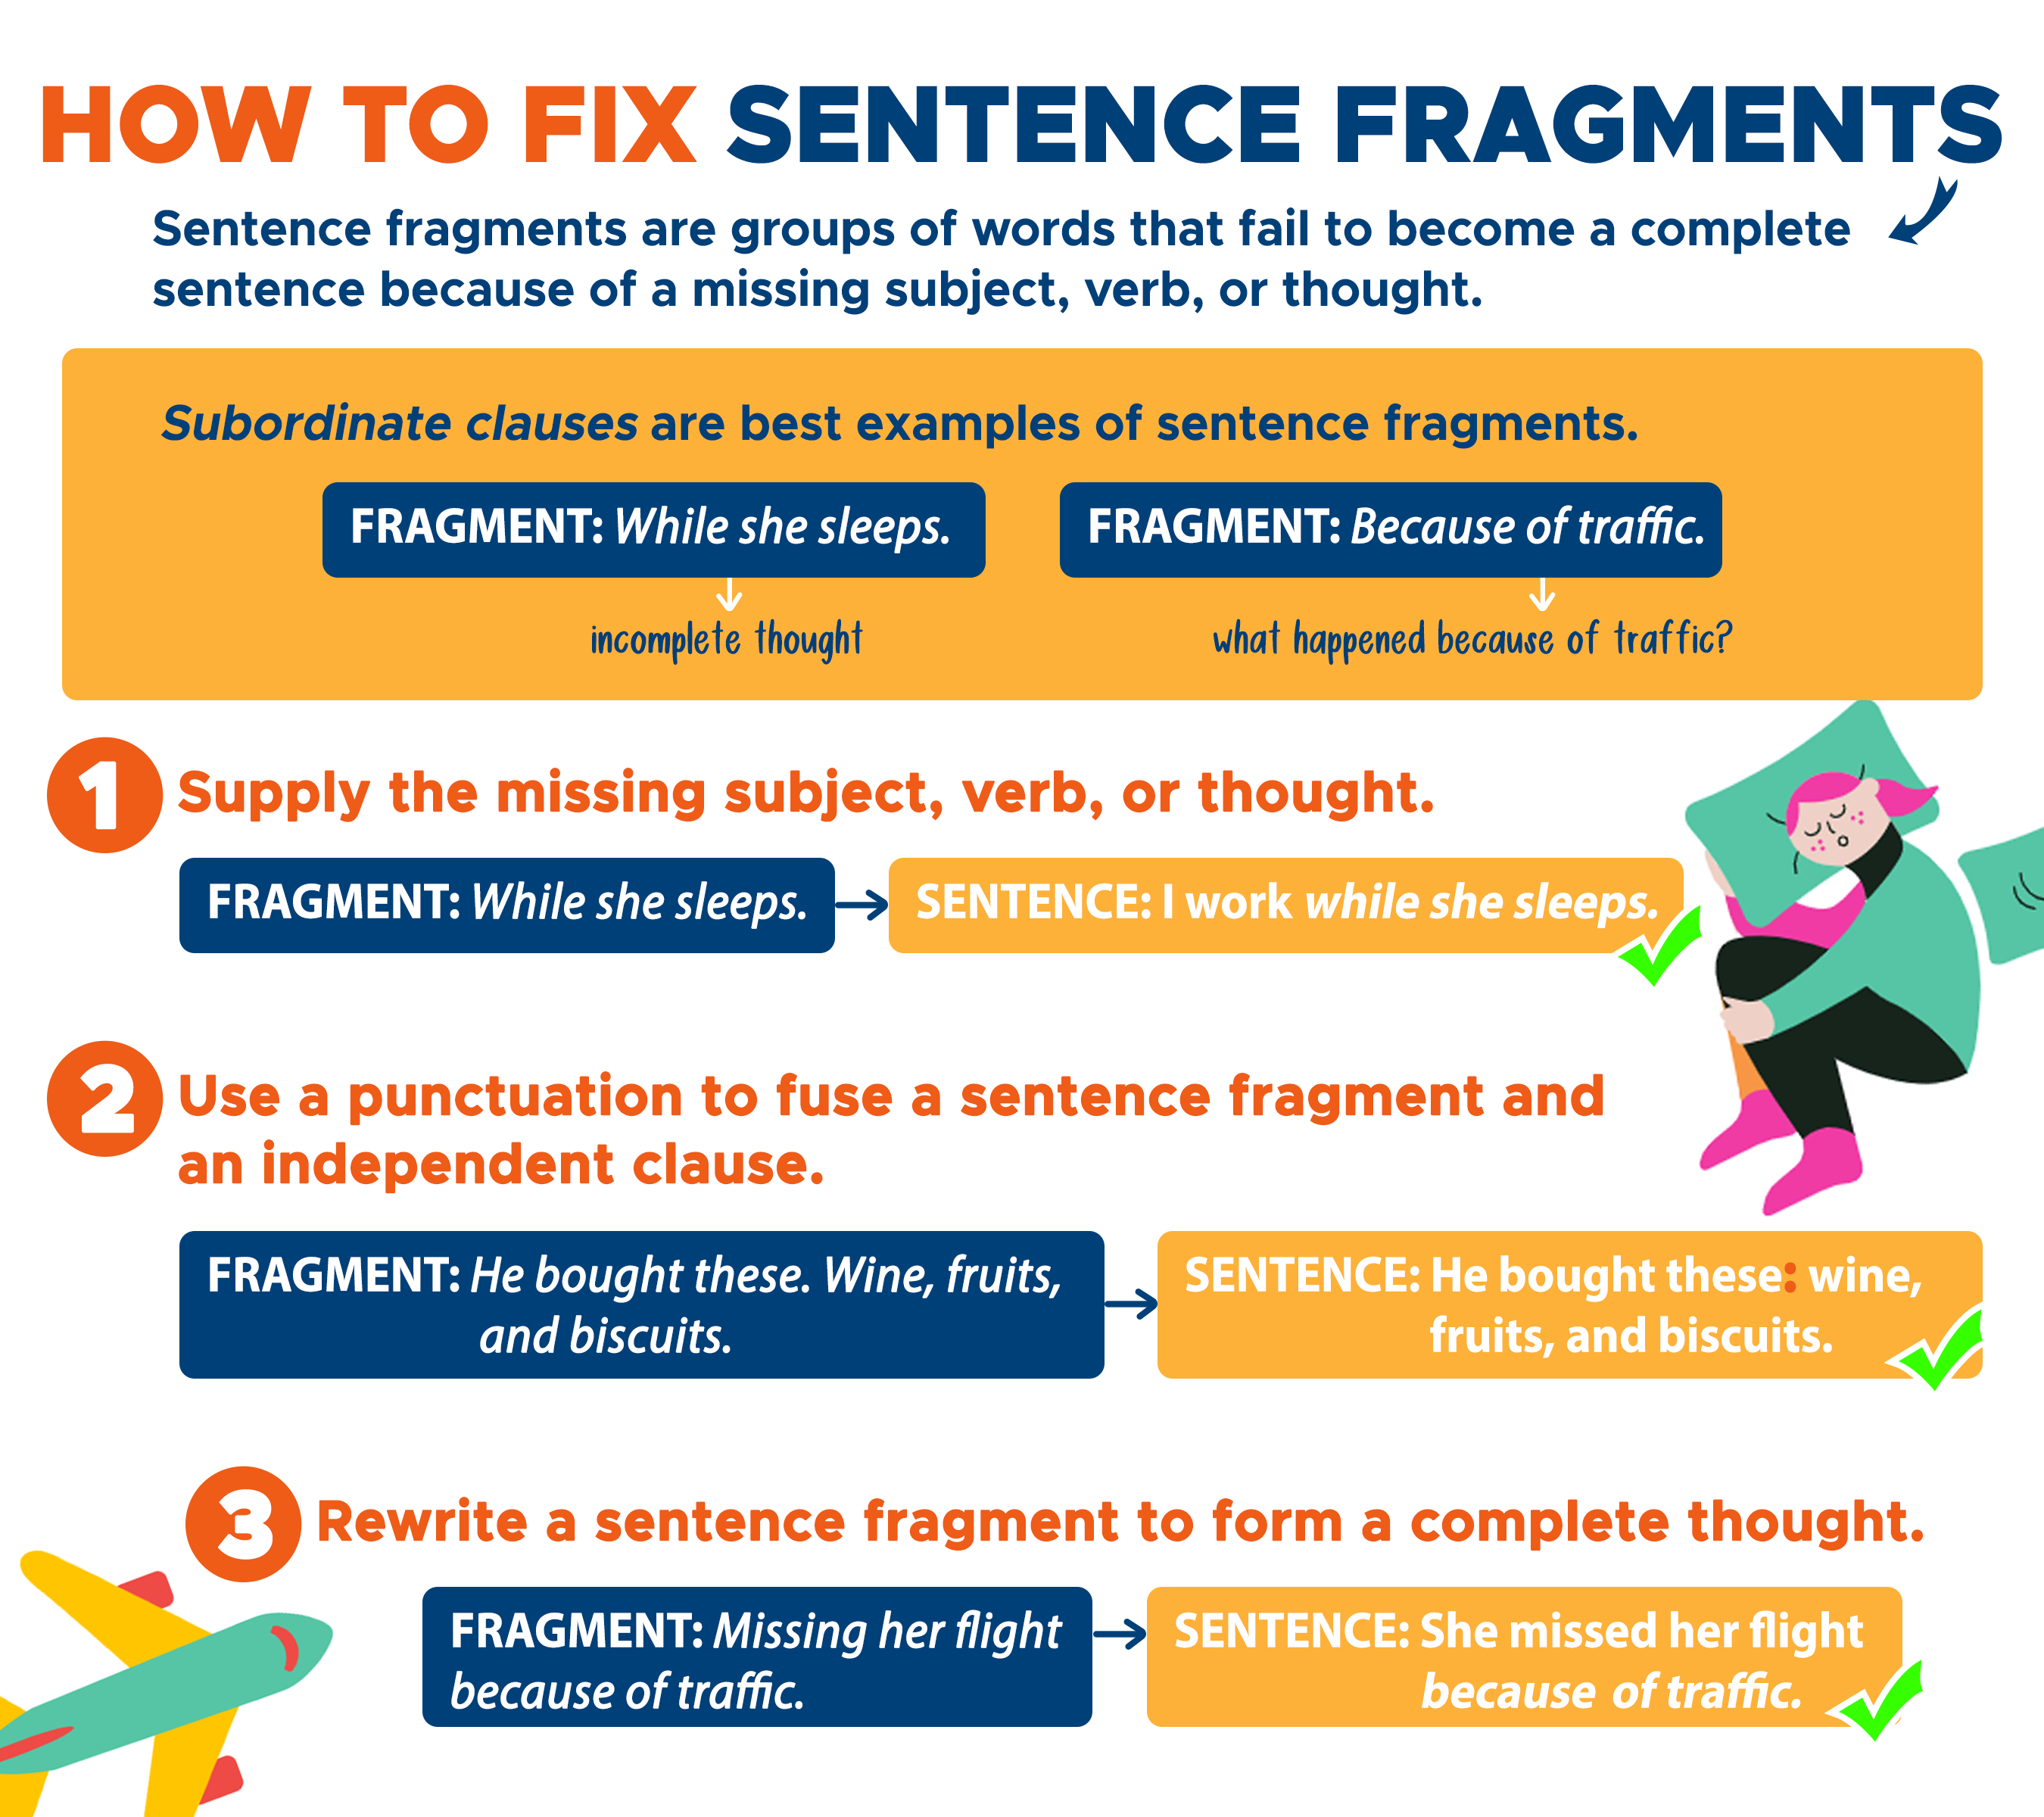 How to Fix Sentence Fragments